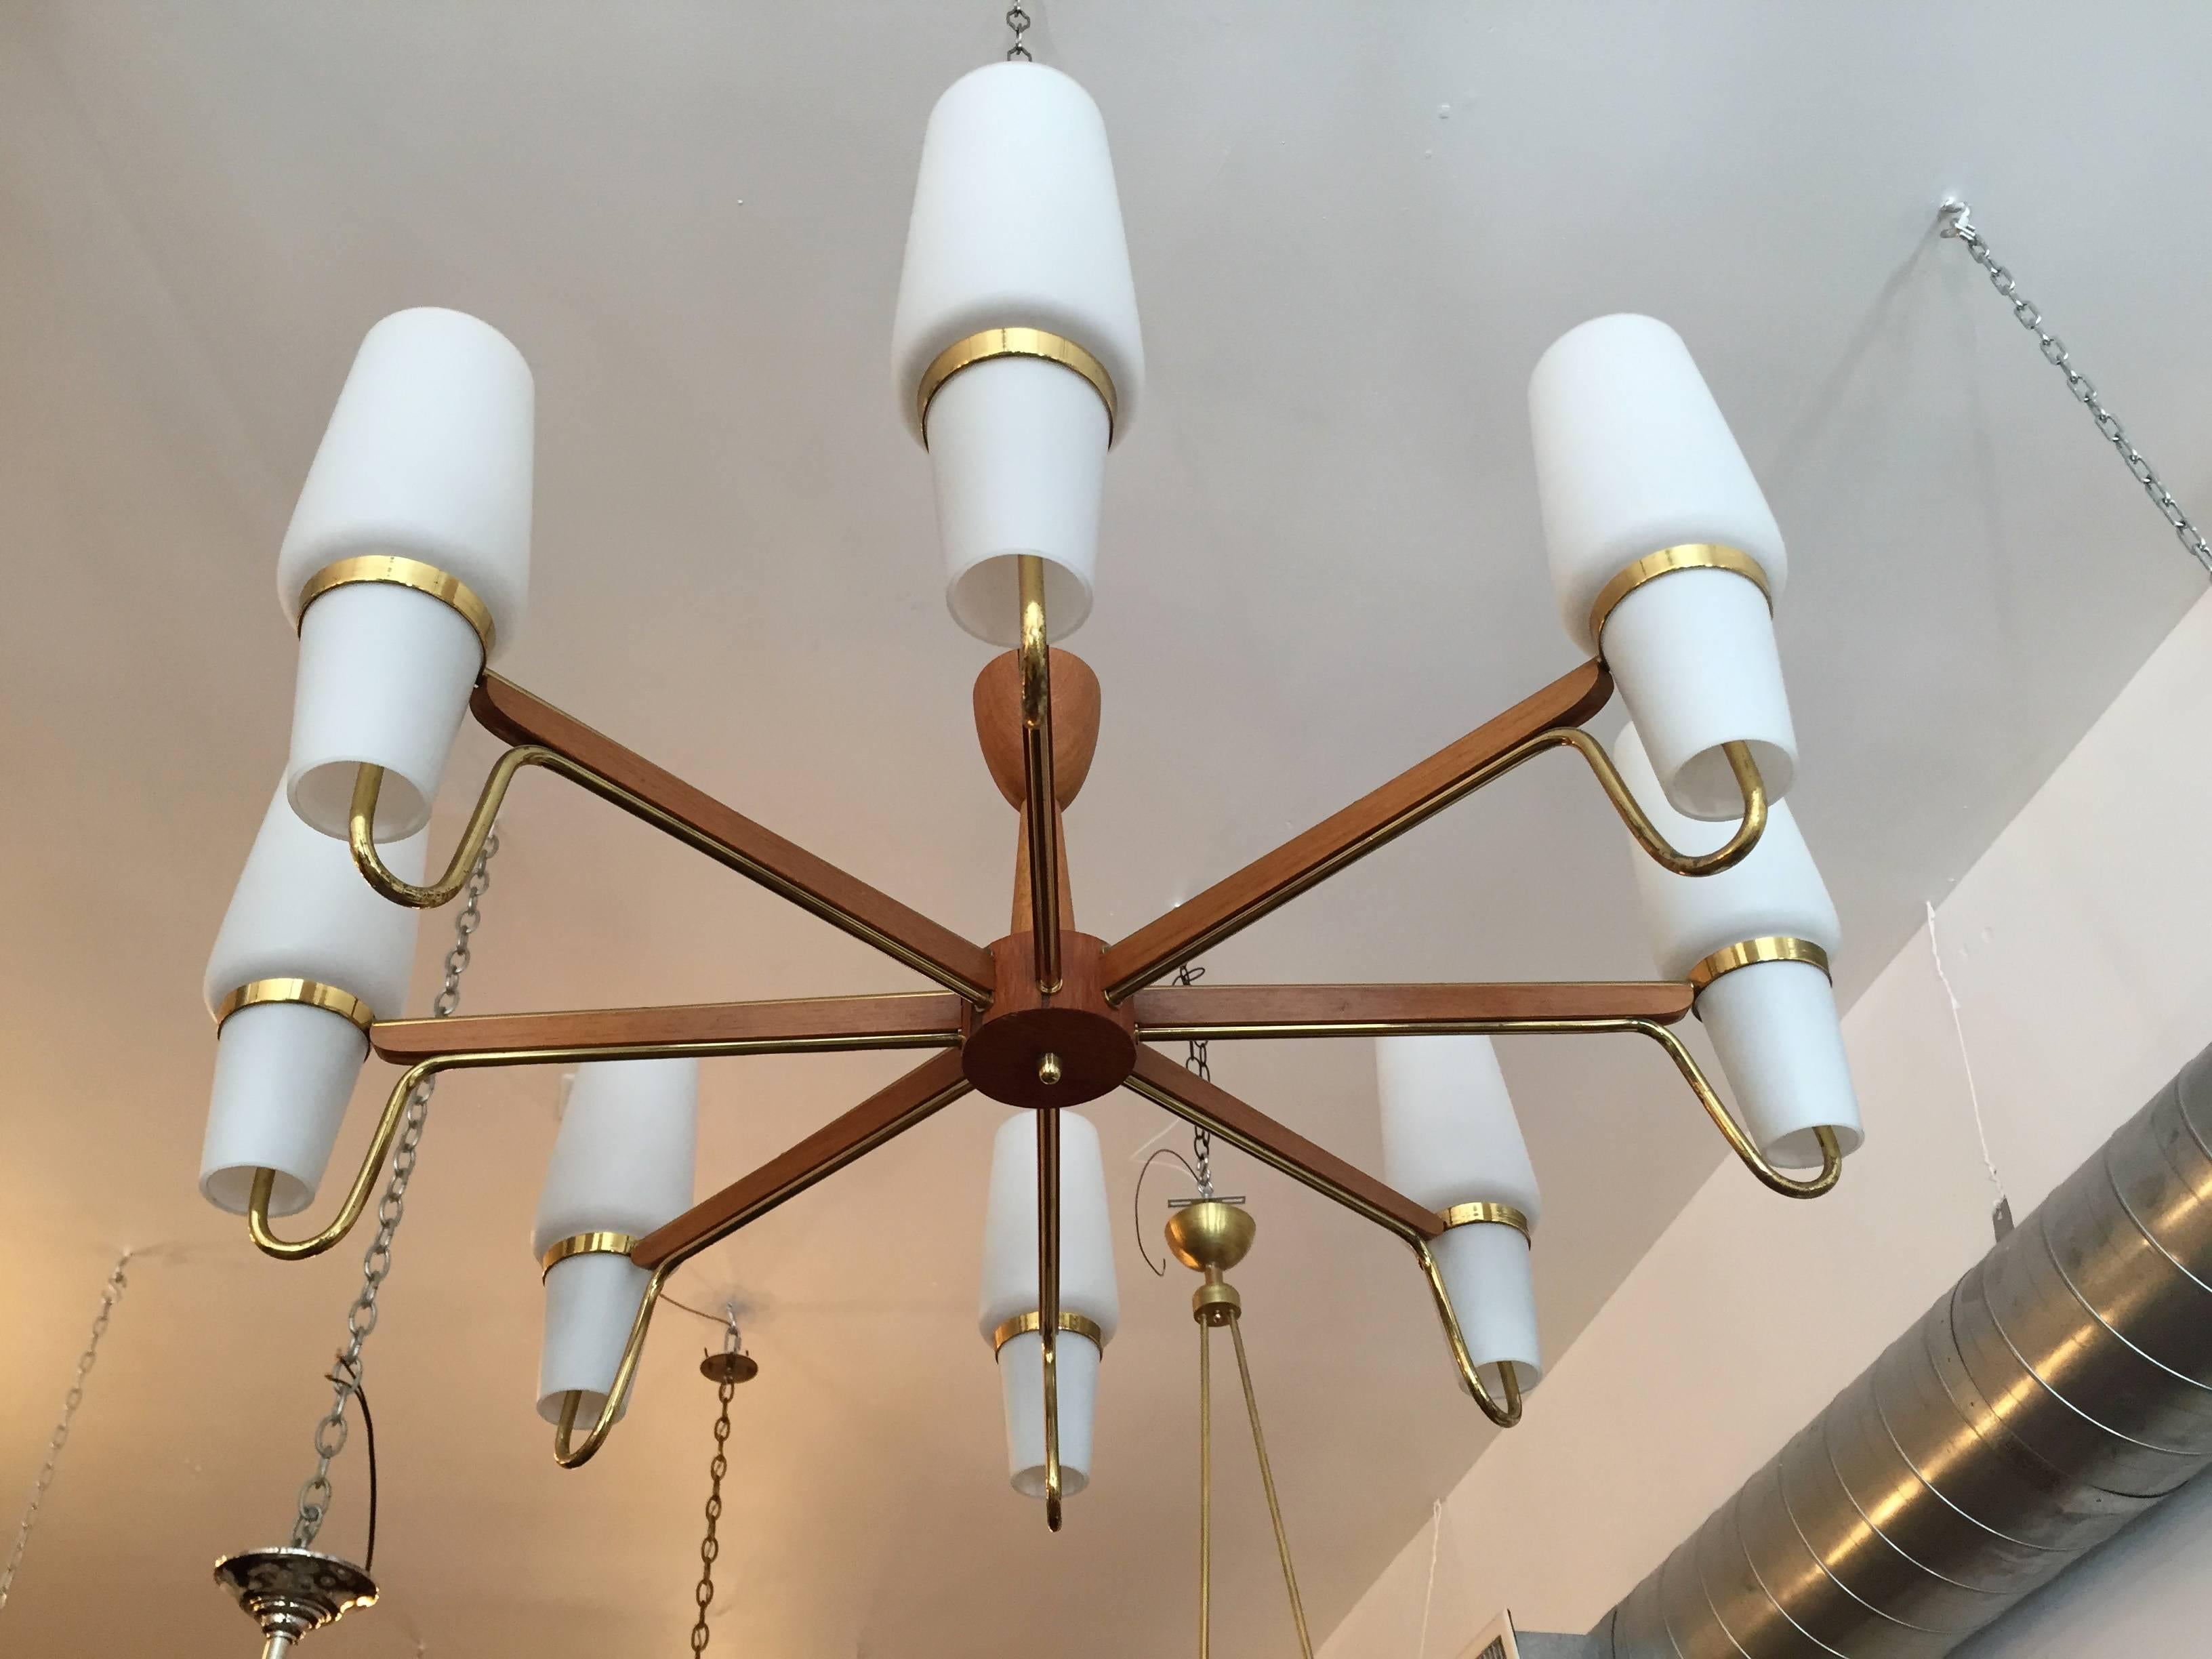 A wonderful original 1950s Danish chandelier done in polished brass and teak with white matte glass shades, rewired.